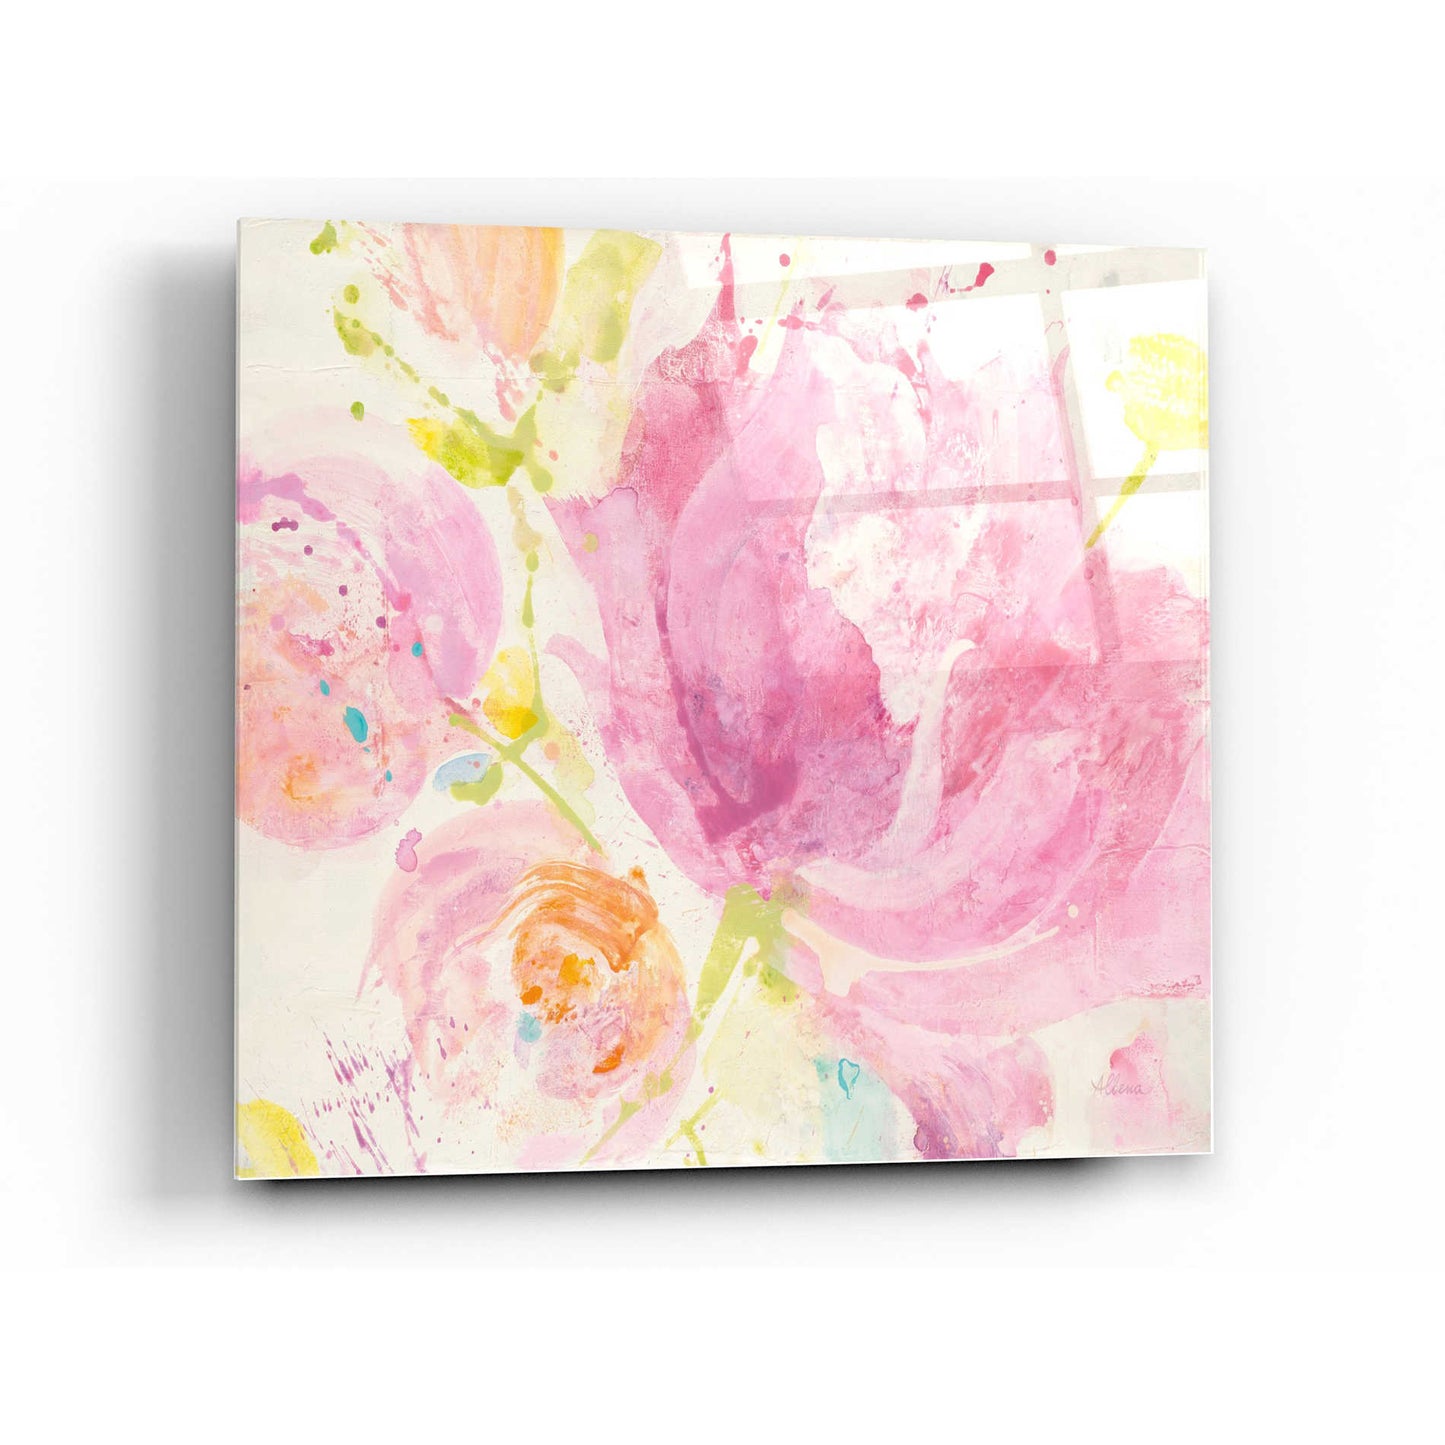 Epic Art 'Spring Abstracts Florals II' by Albena Hristova, Acrylic Glass Wall Art,12x12